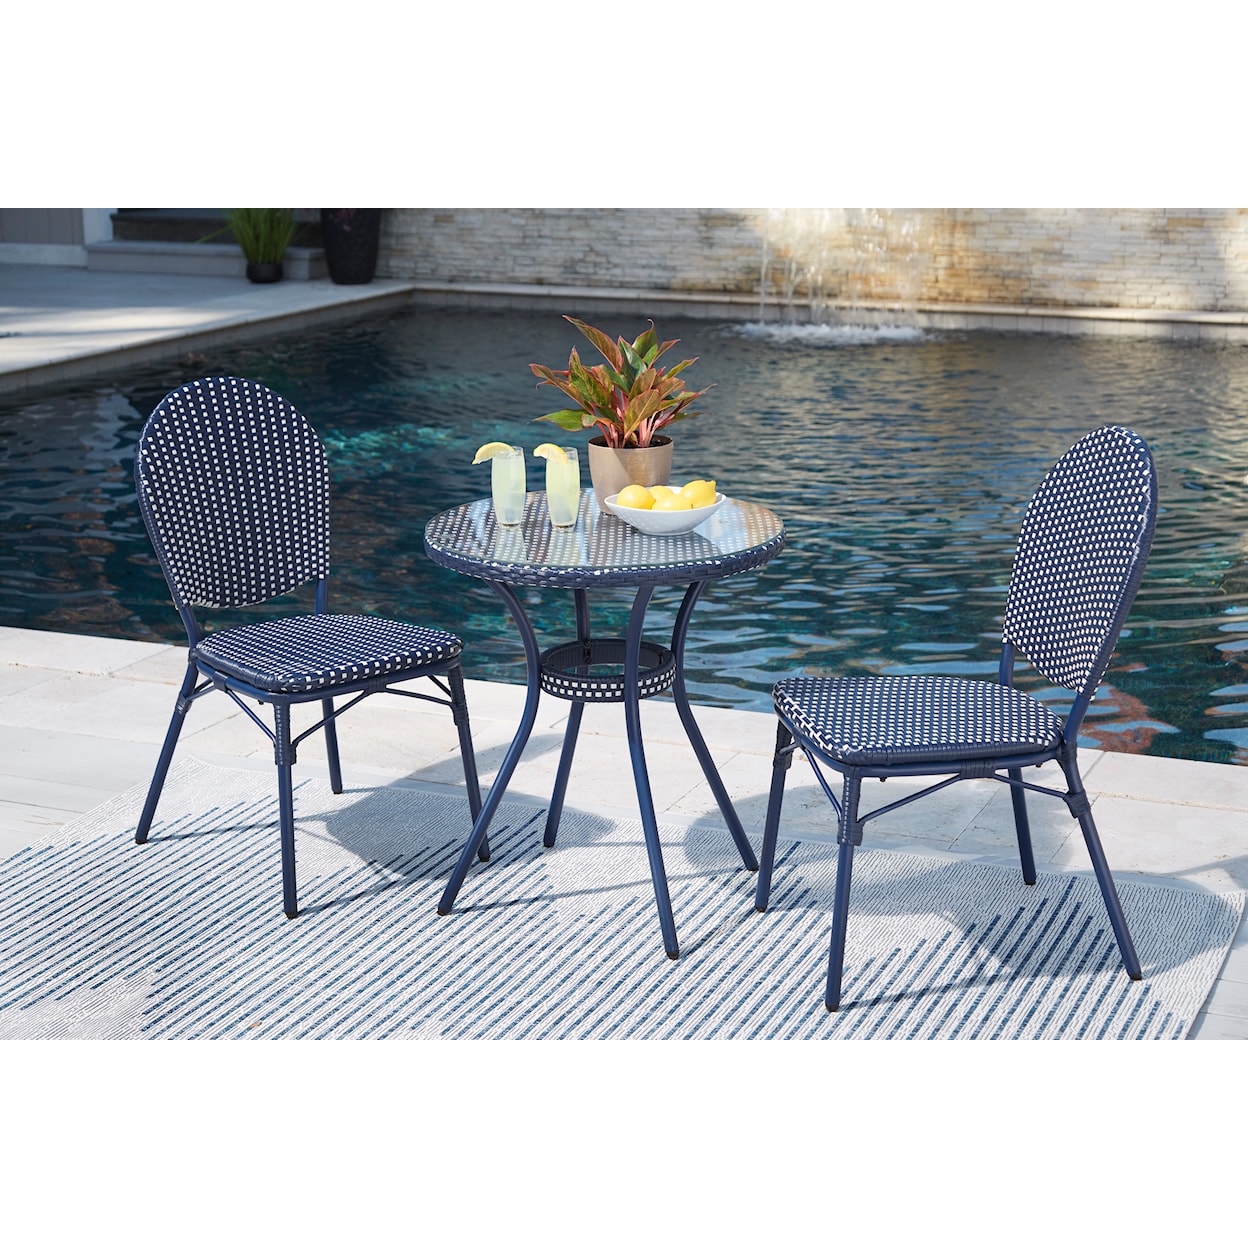 Benchcraft Odyssey Blue Outdoor Table and Chairs (Set of 3)